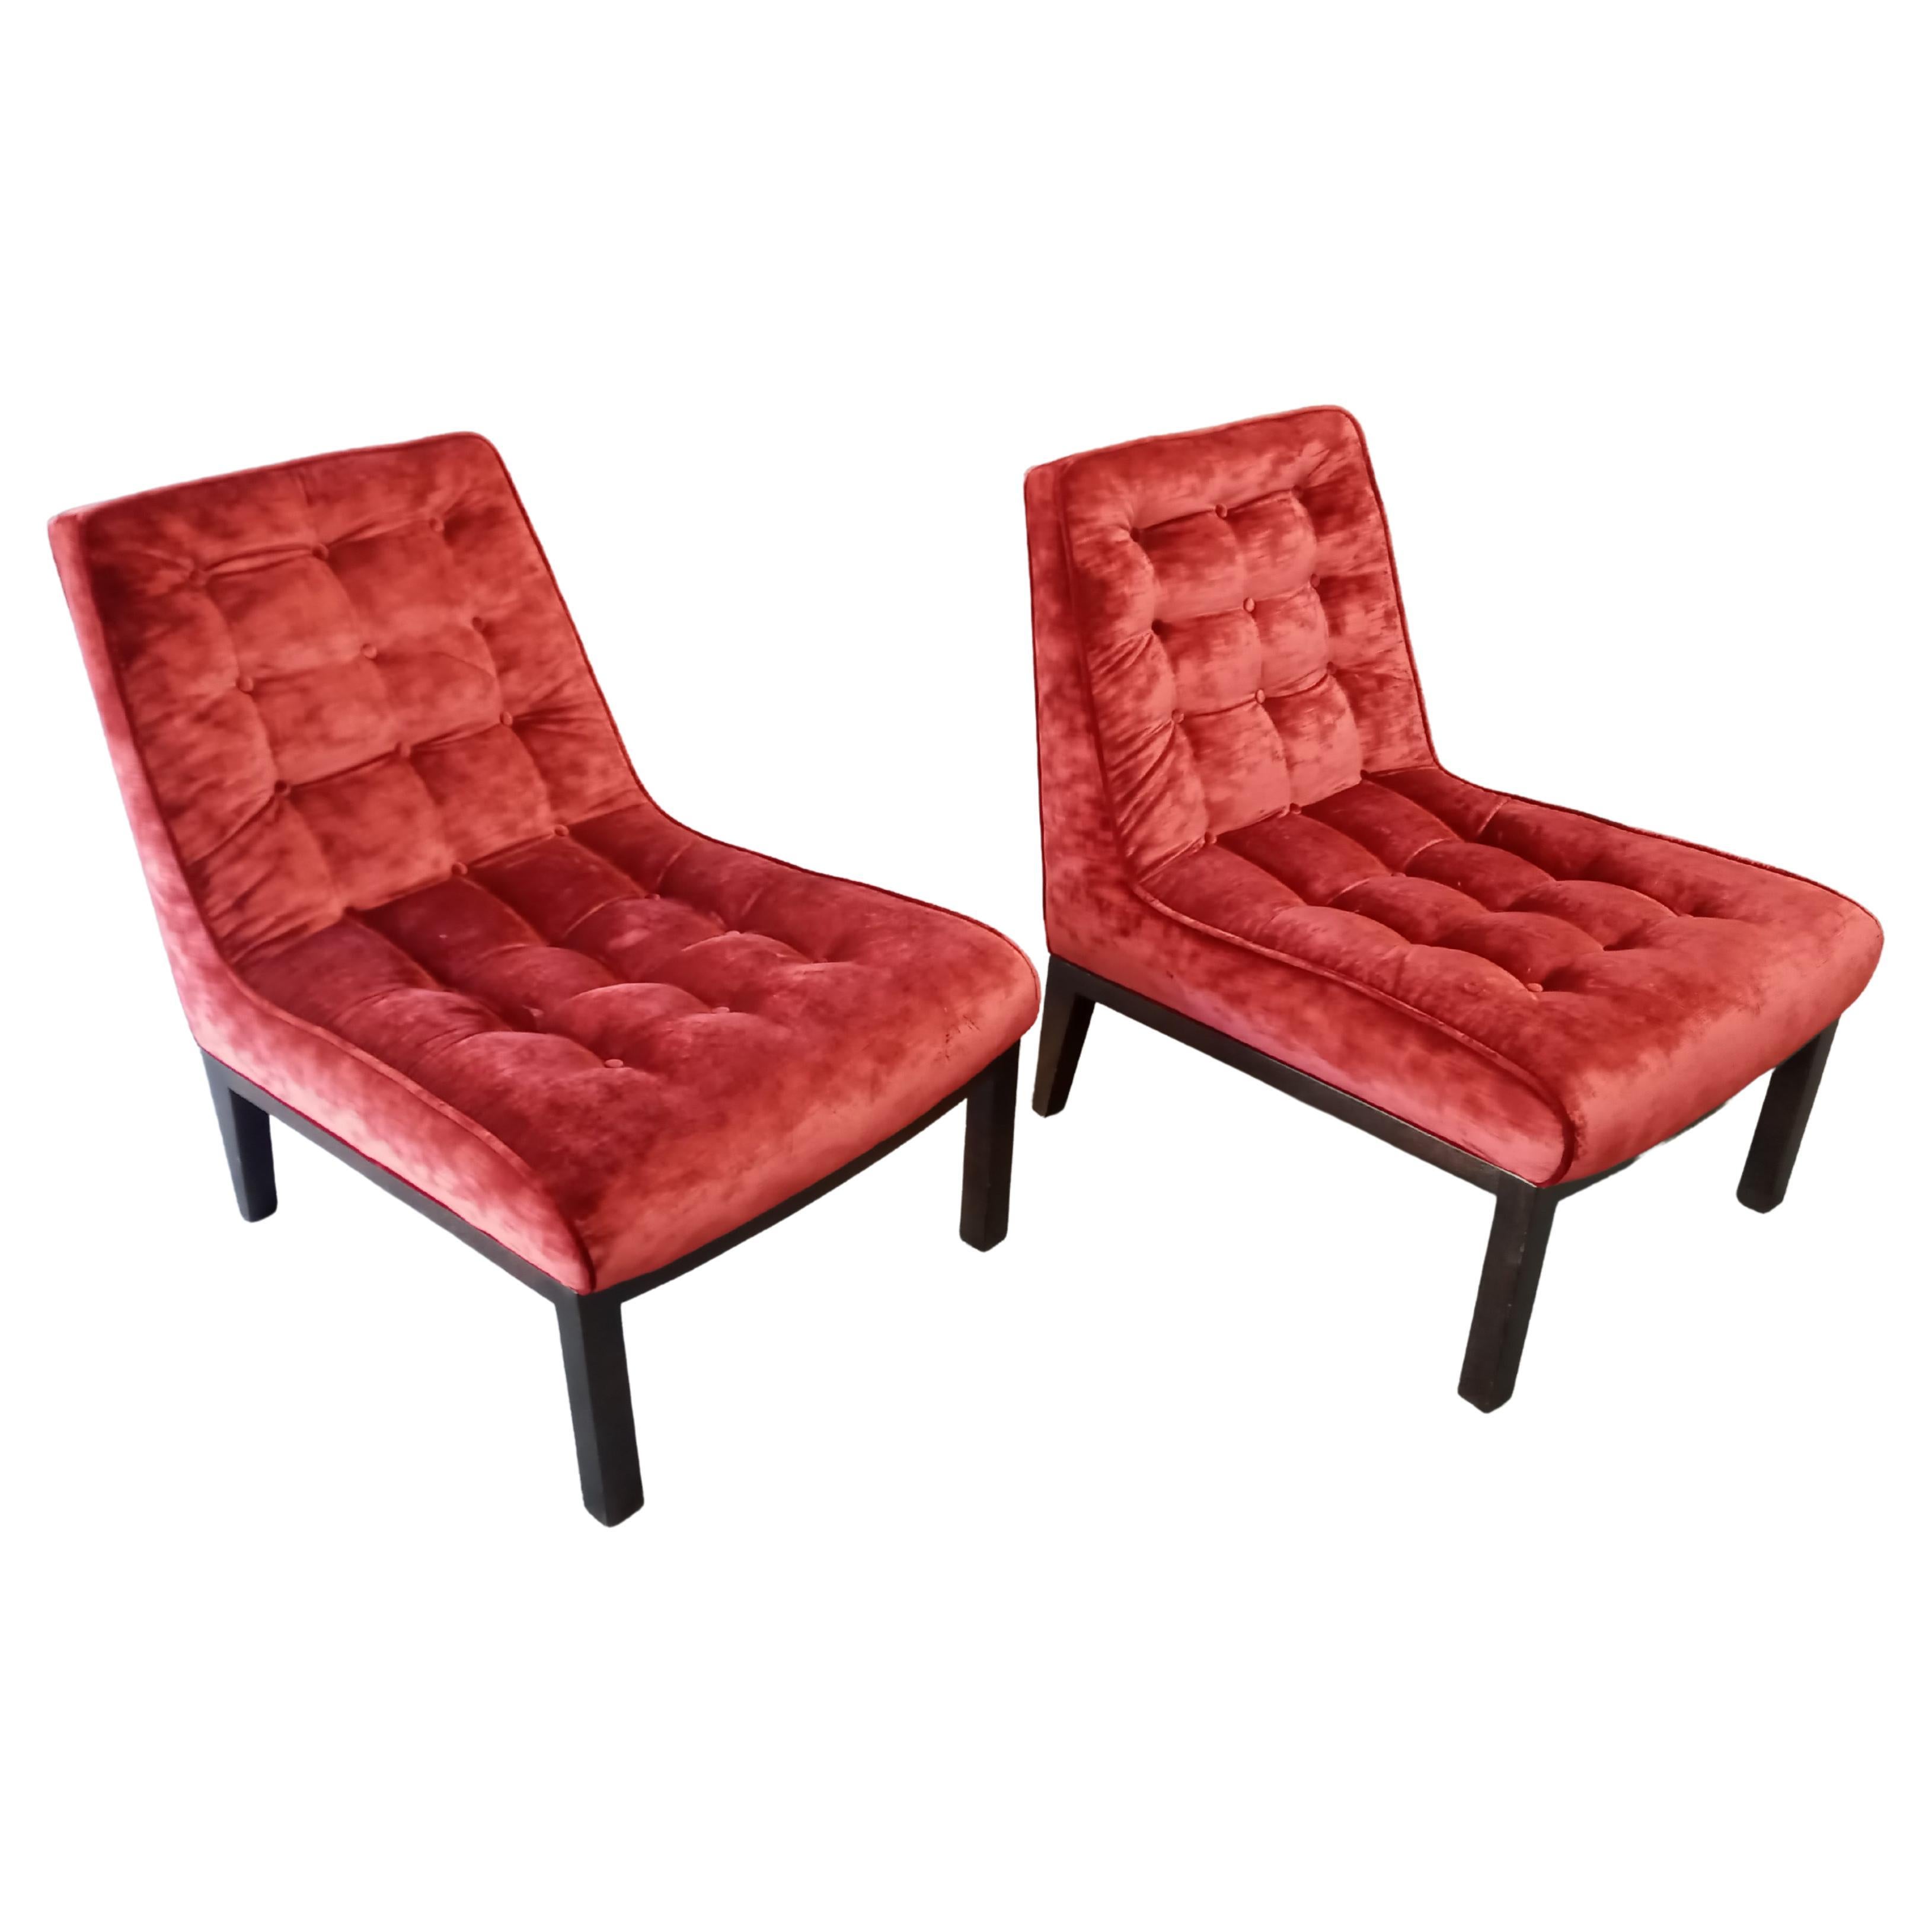 Edward Wormley for Dunbar Pair of Elegant Slipper Lounge Chairs For Sale